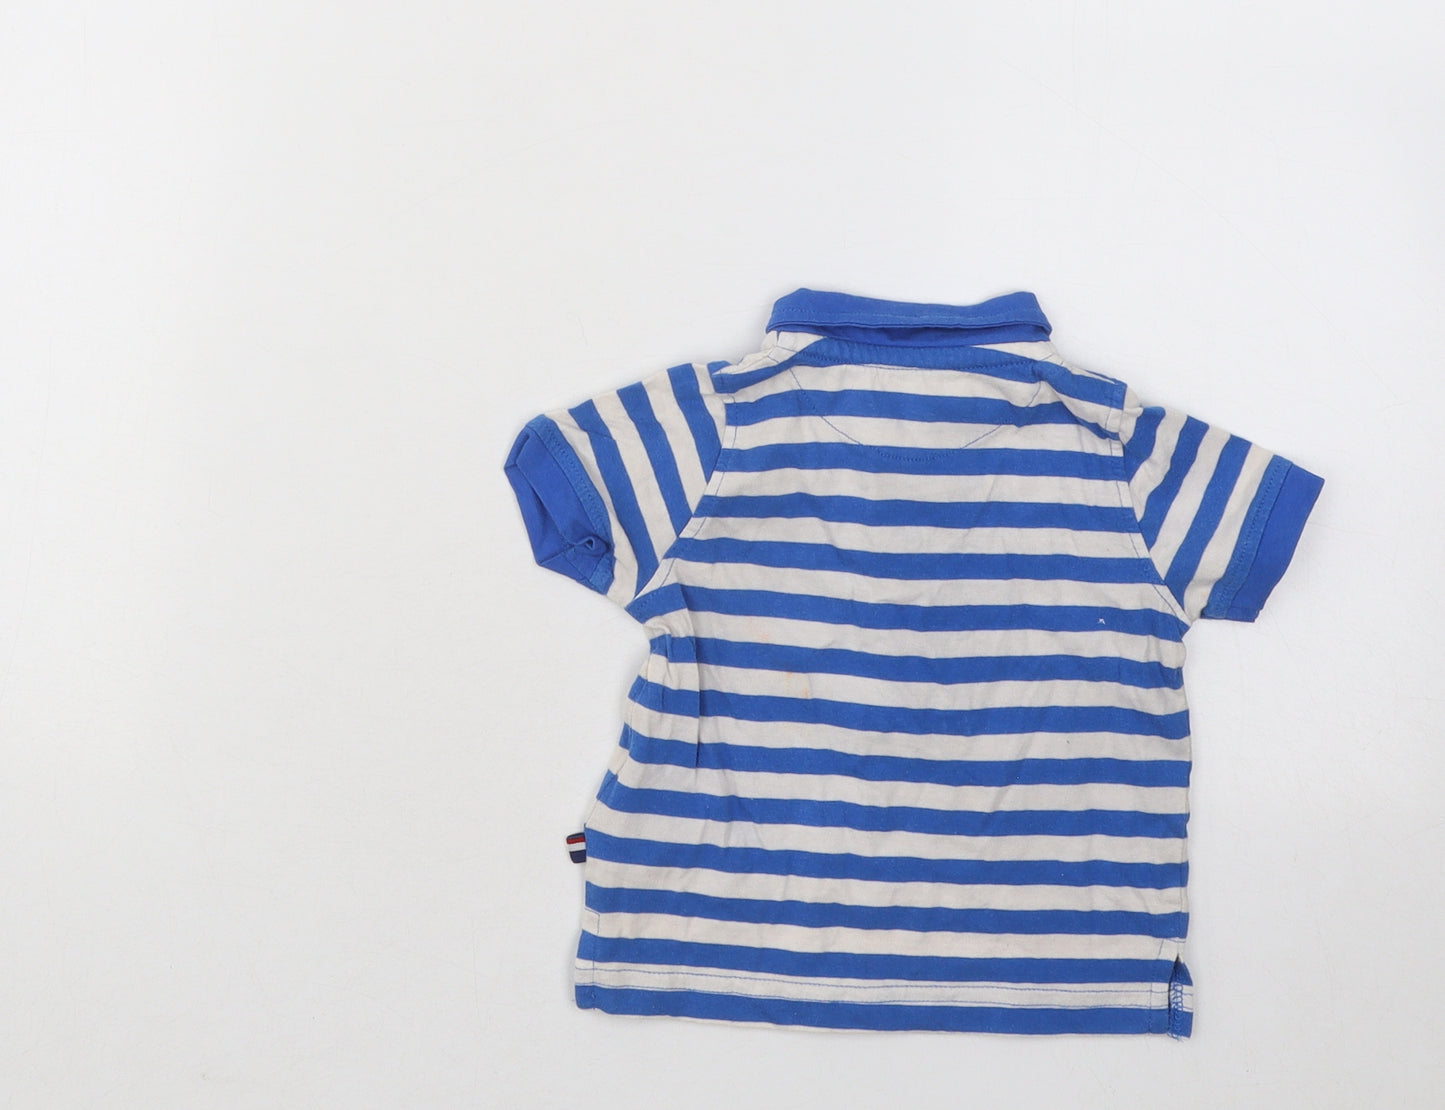 US Polo Assn. Boys Blue Striped Cotton Basic Polo Size 9-12 Months Collared Pullover